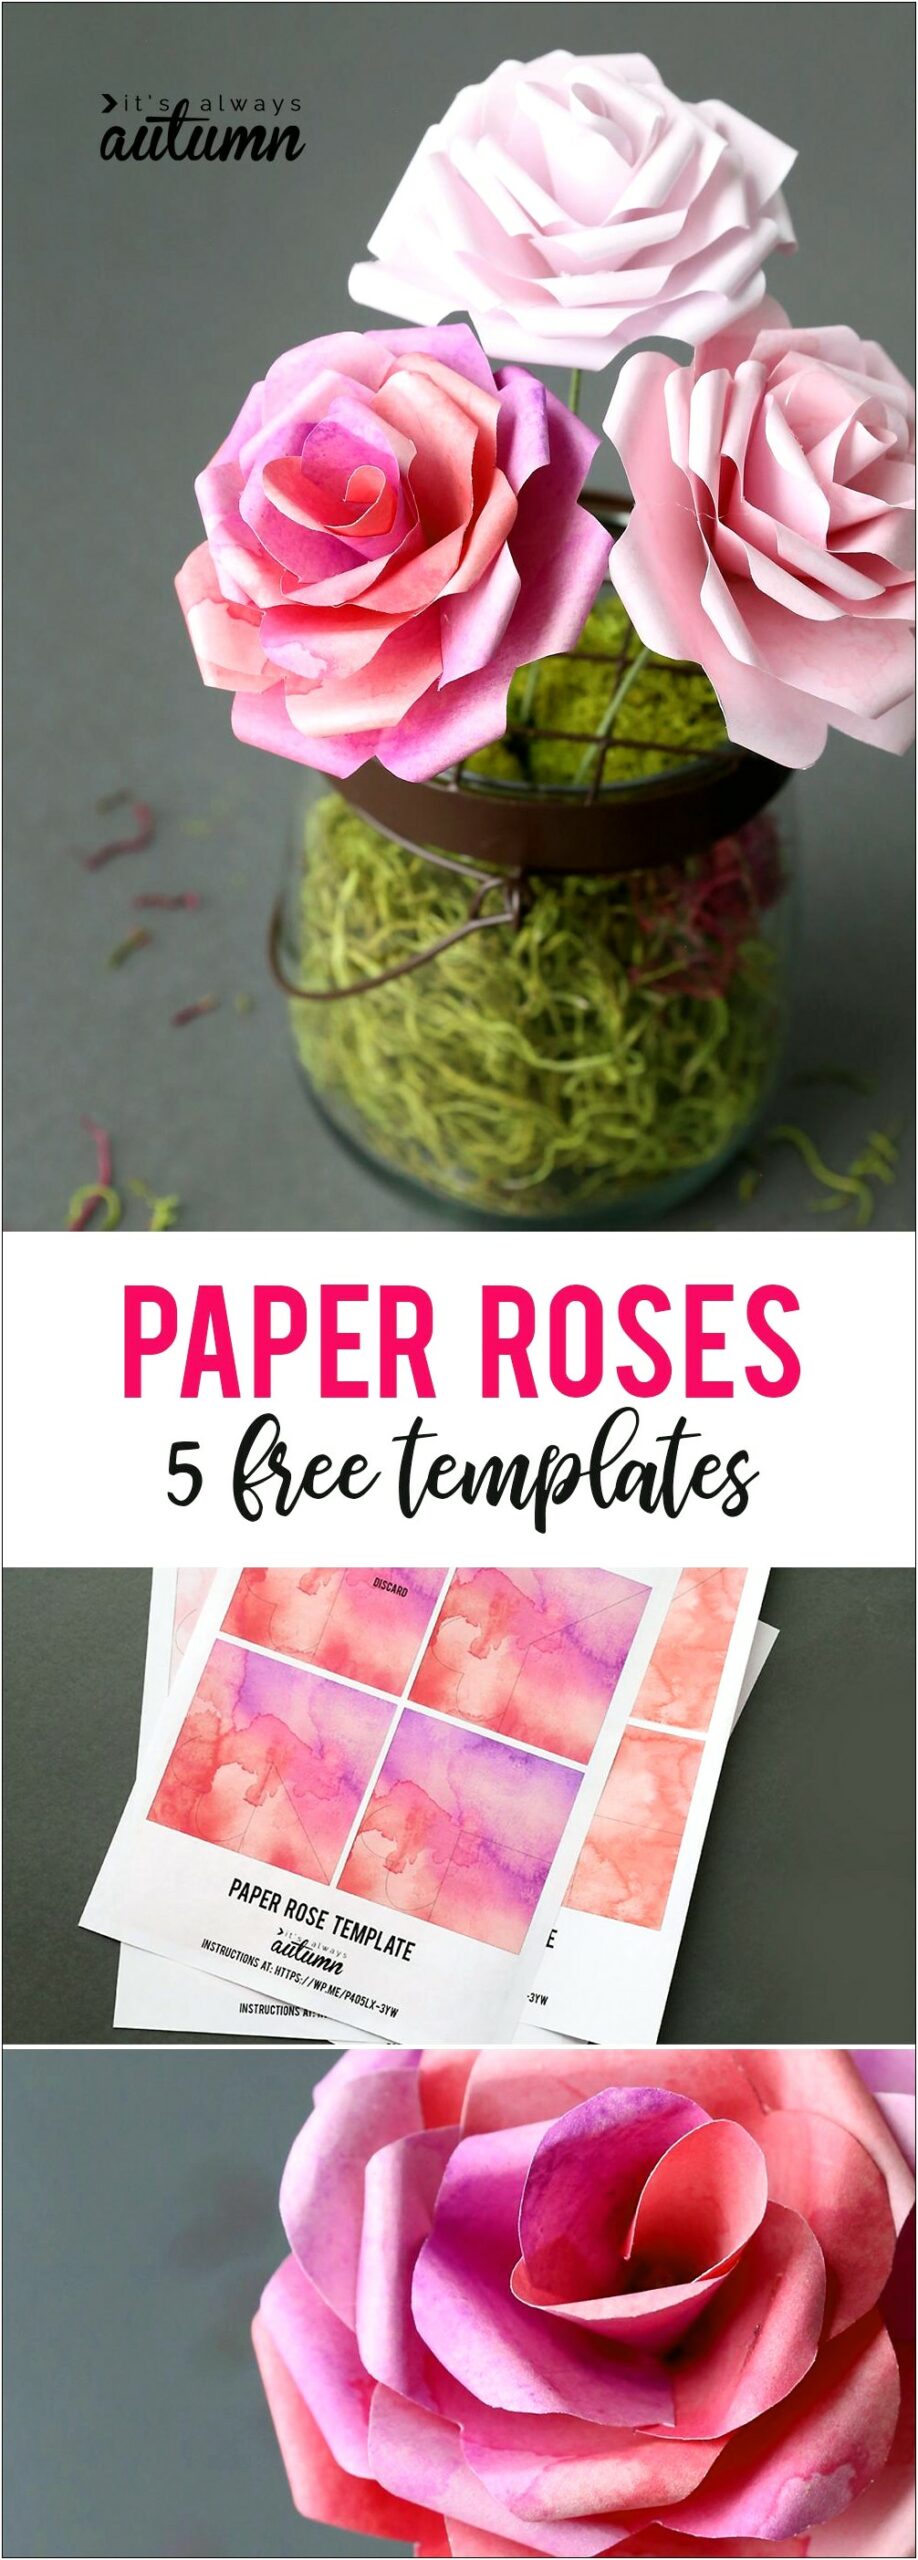 Free Paper Flower Templates And Instructions